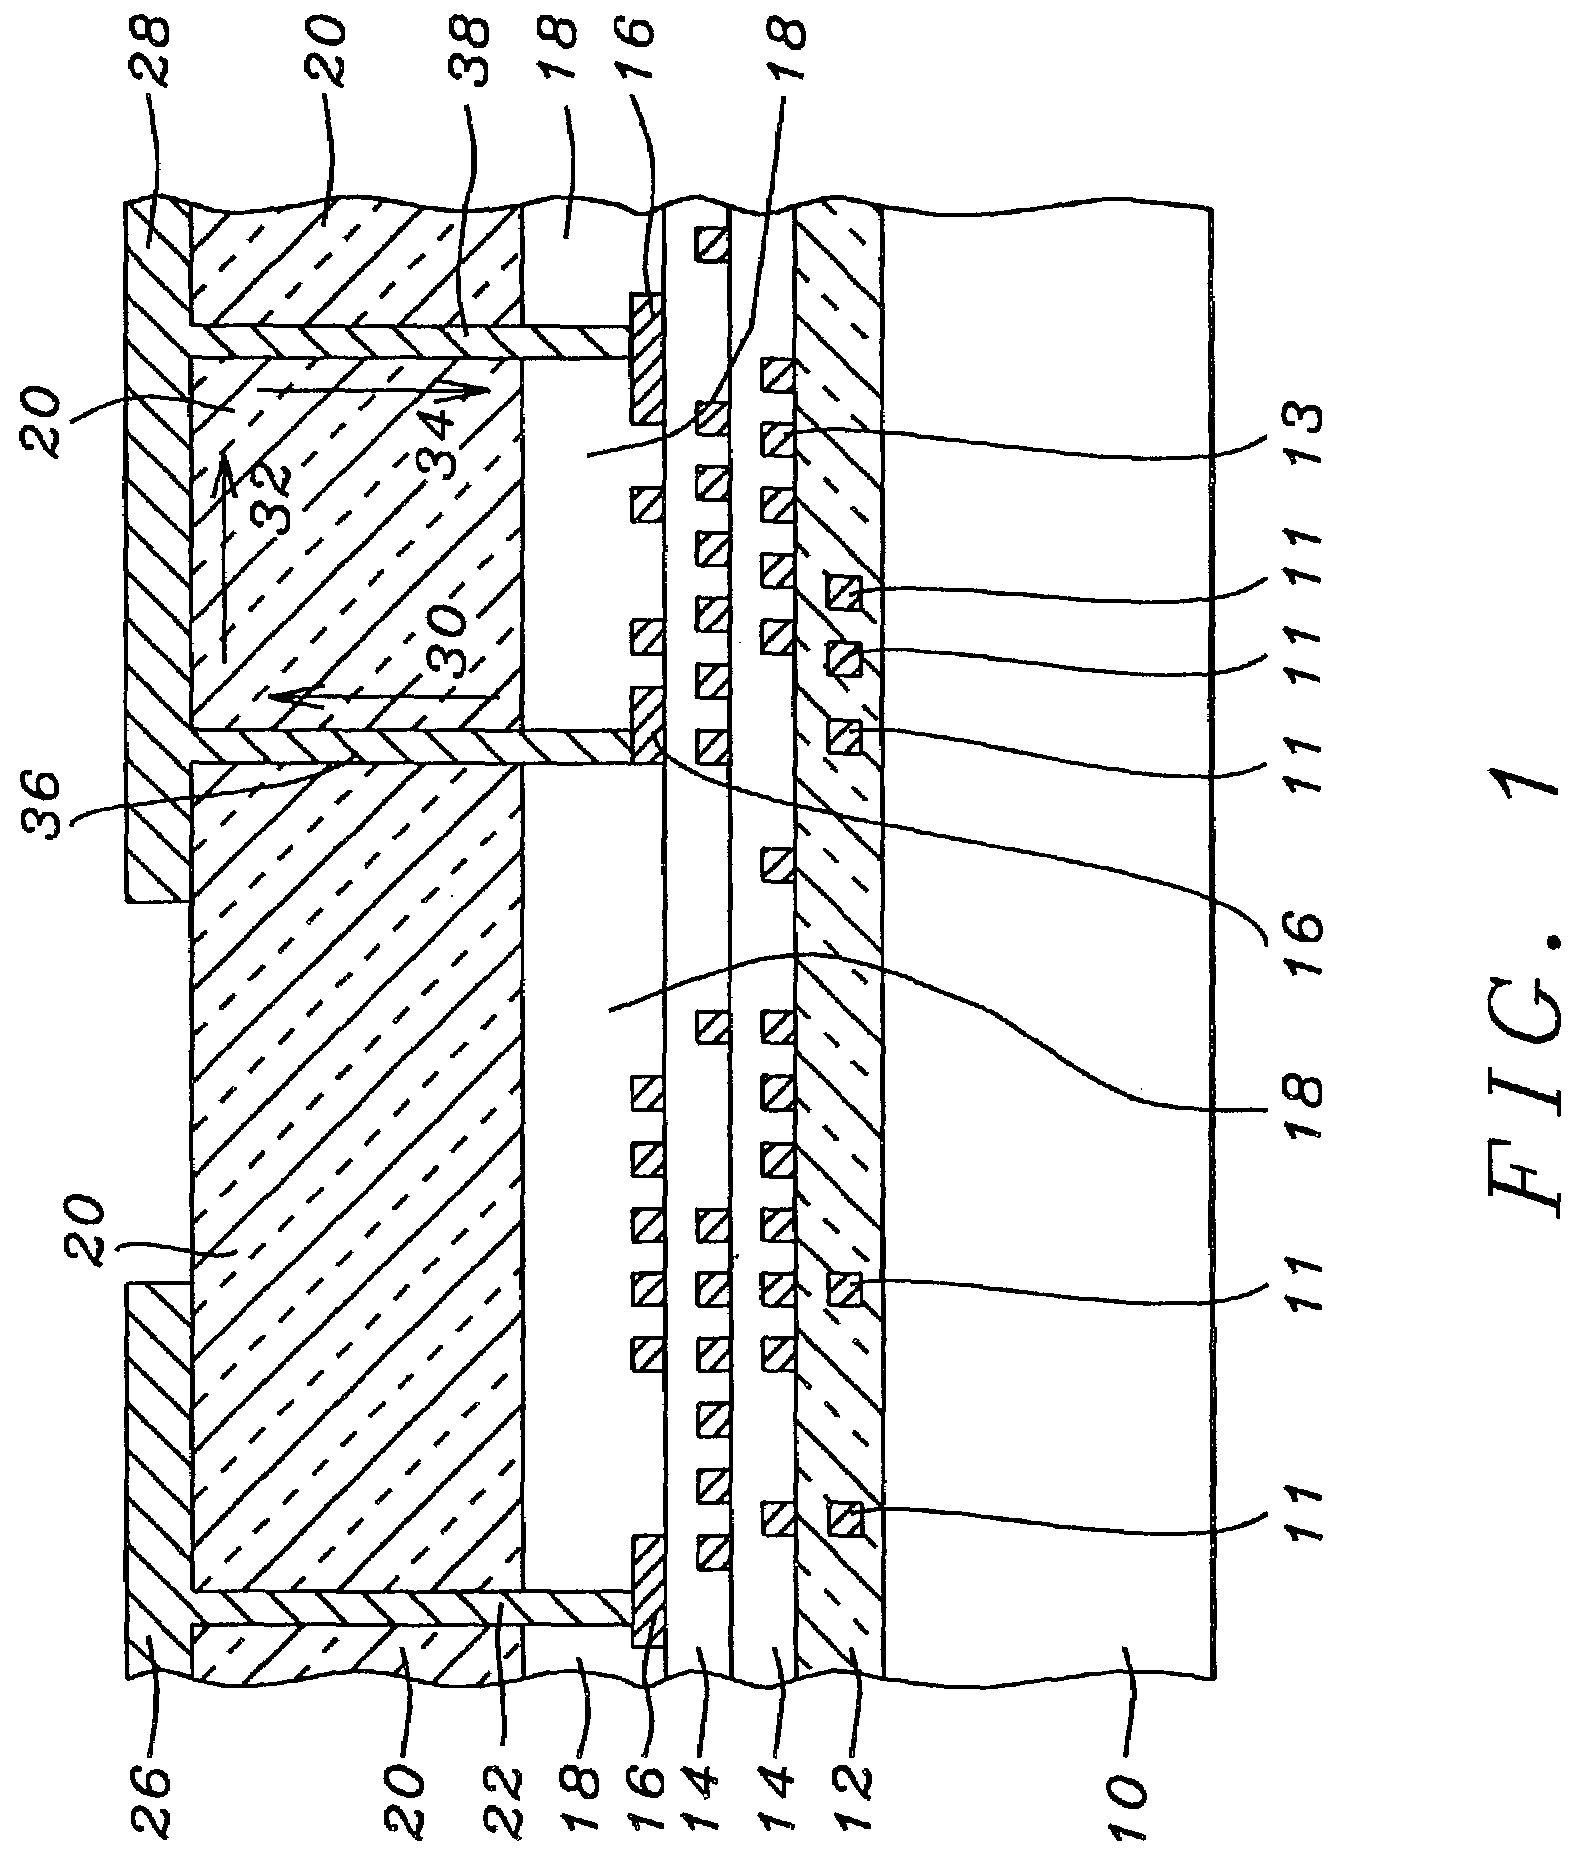 High performance system-on-chip passive device using post passivation process